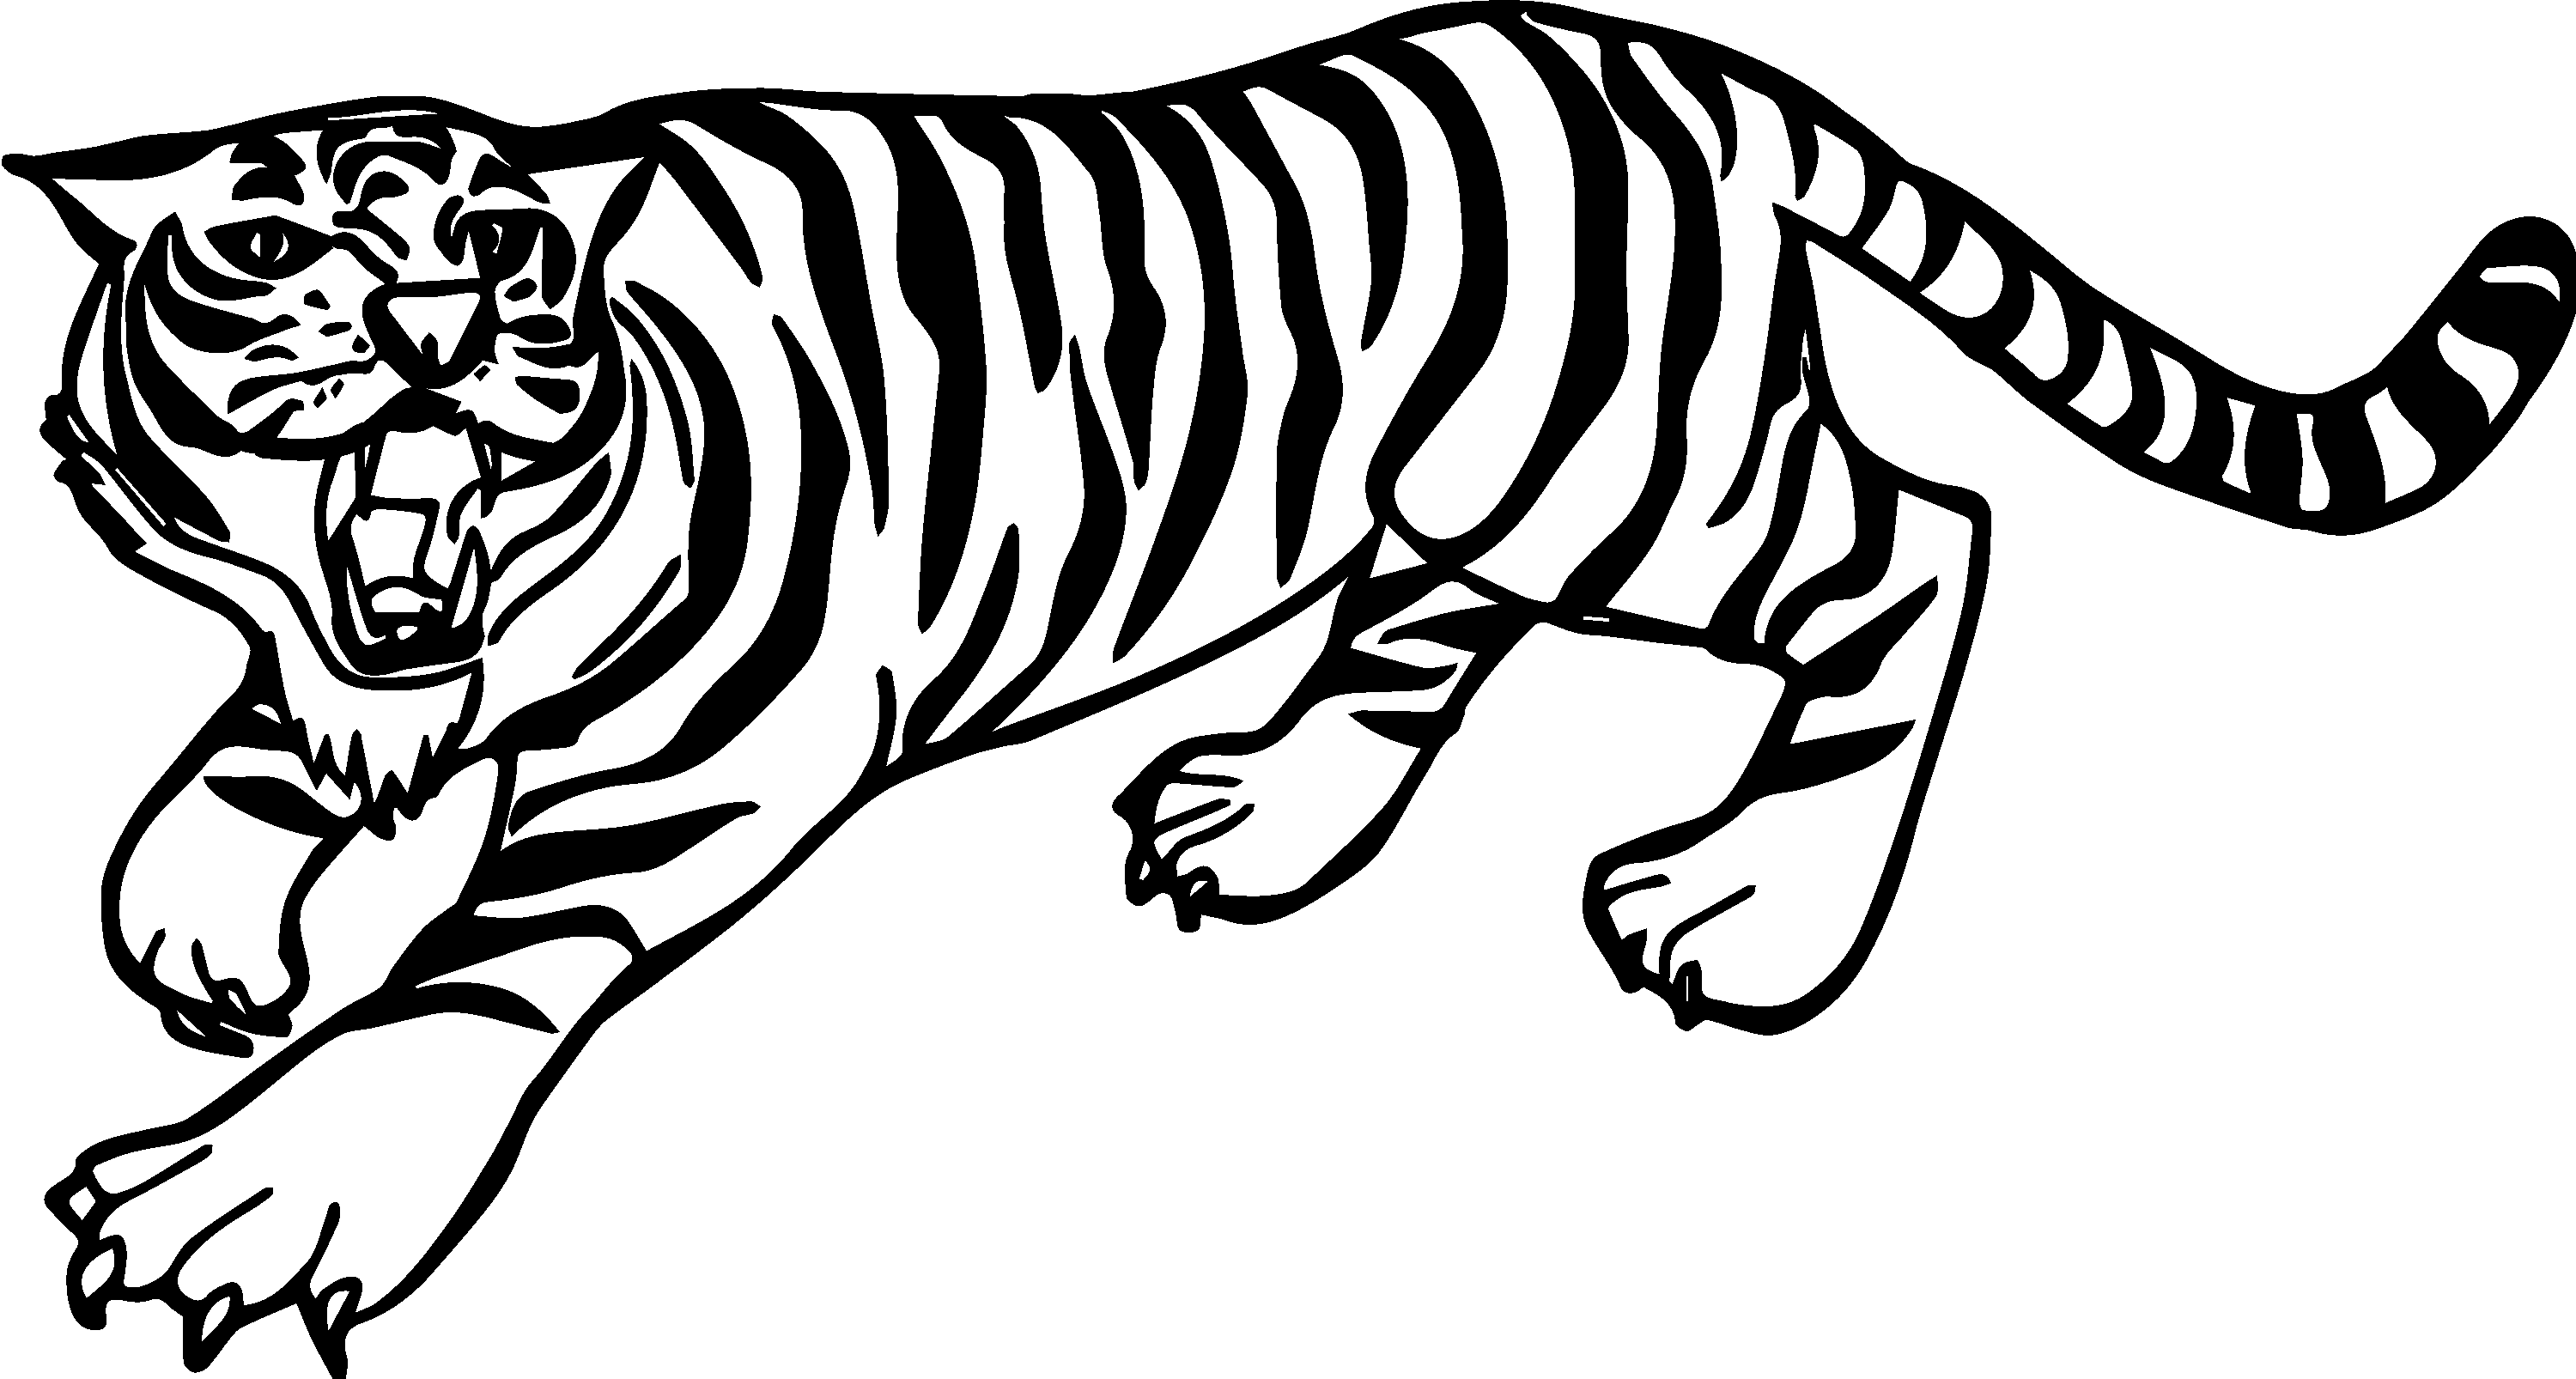 Tiger Coloring Pages | Free download on ClipArtMag